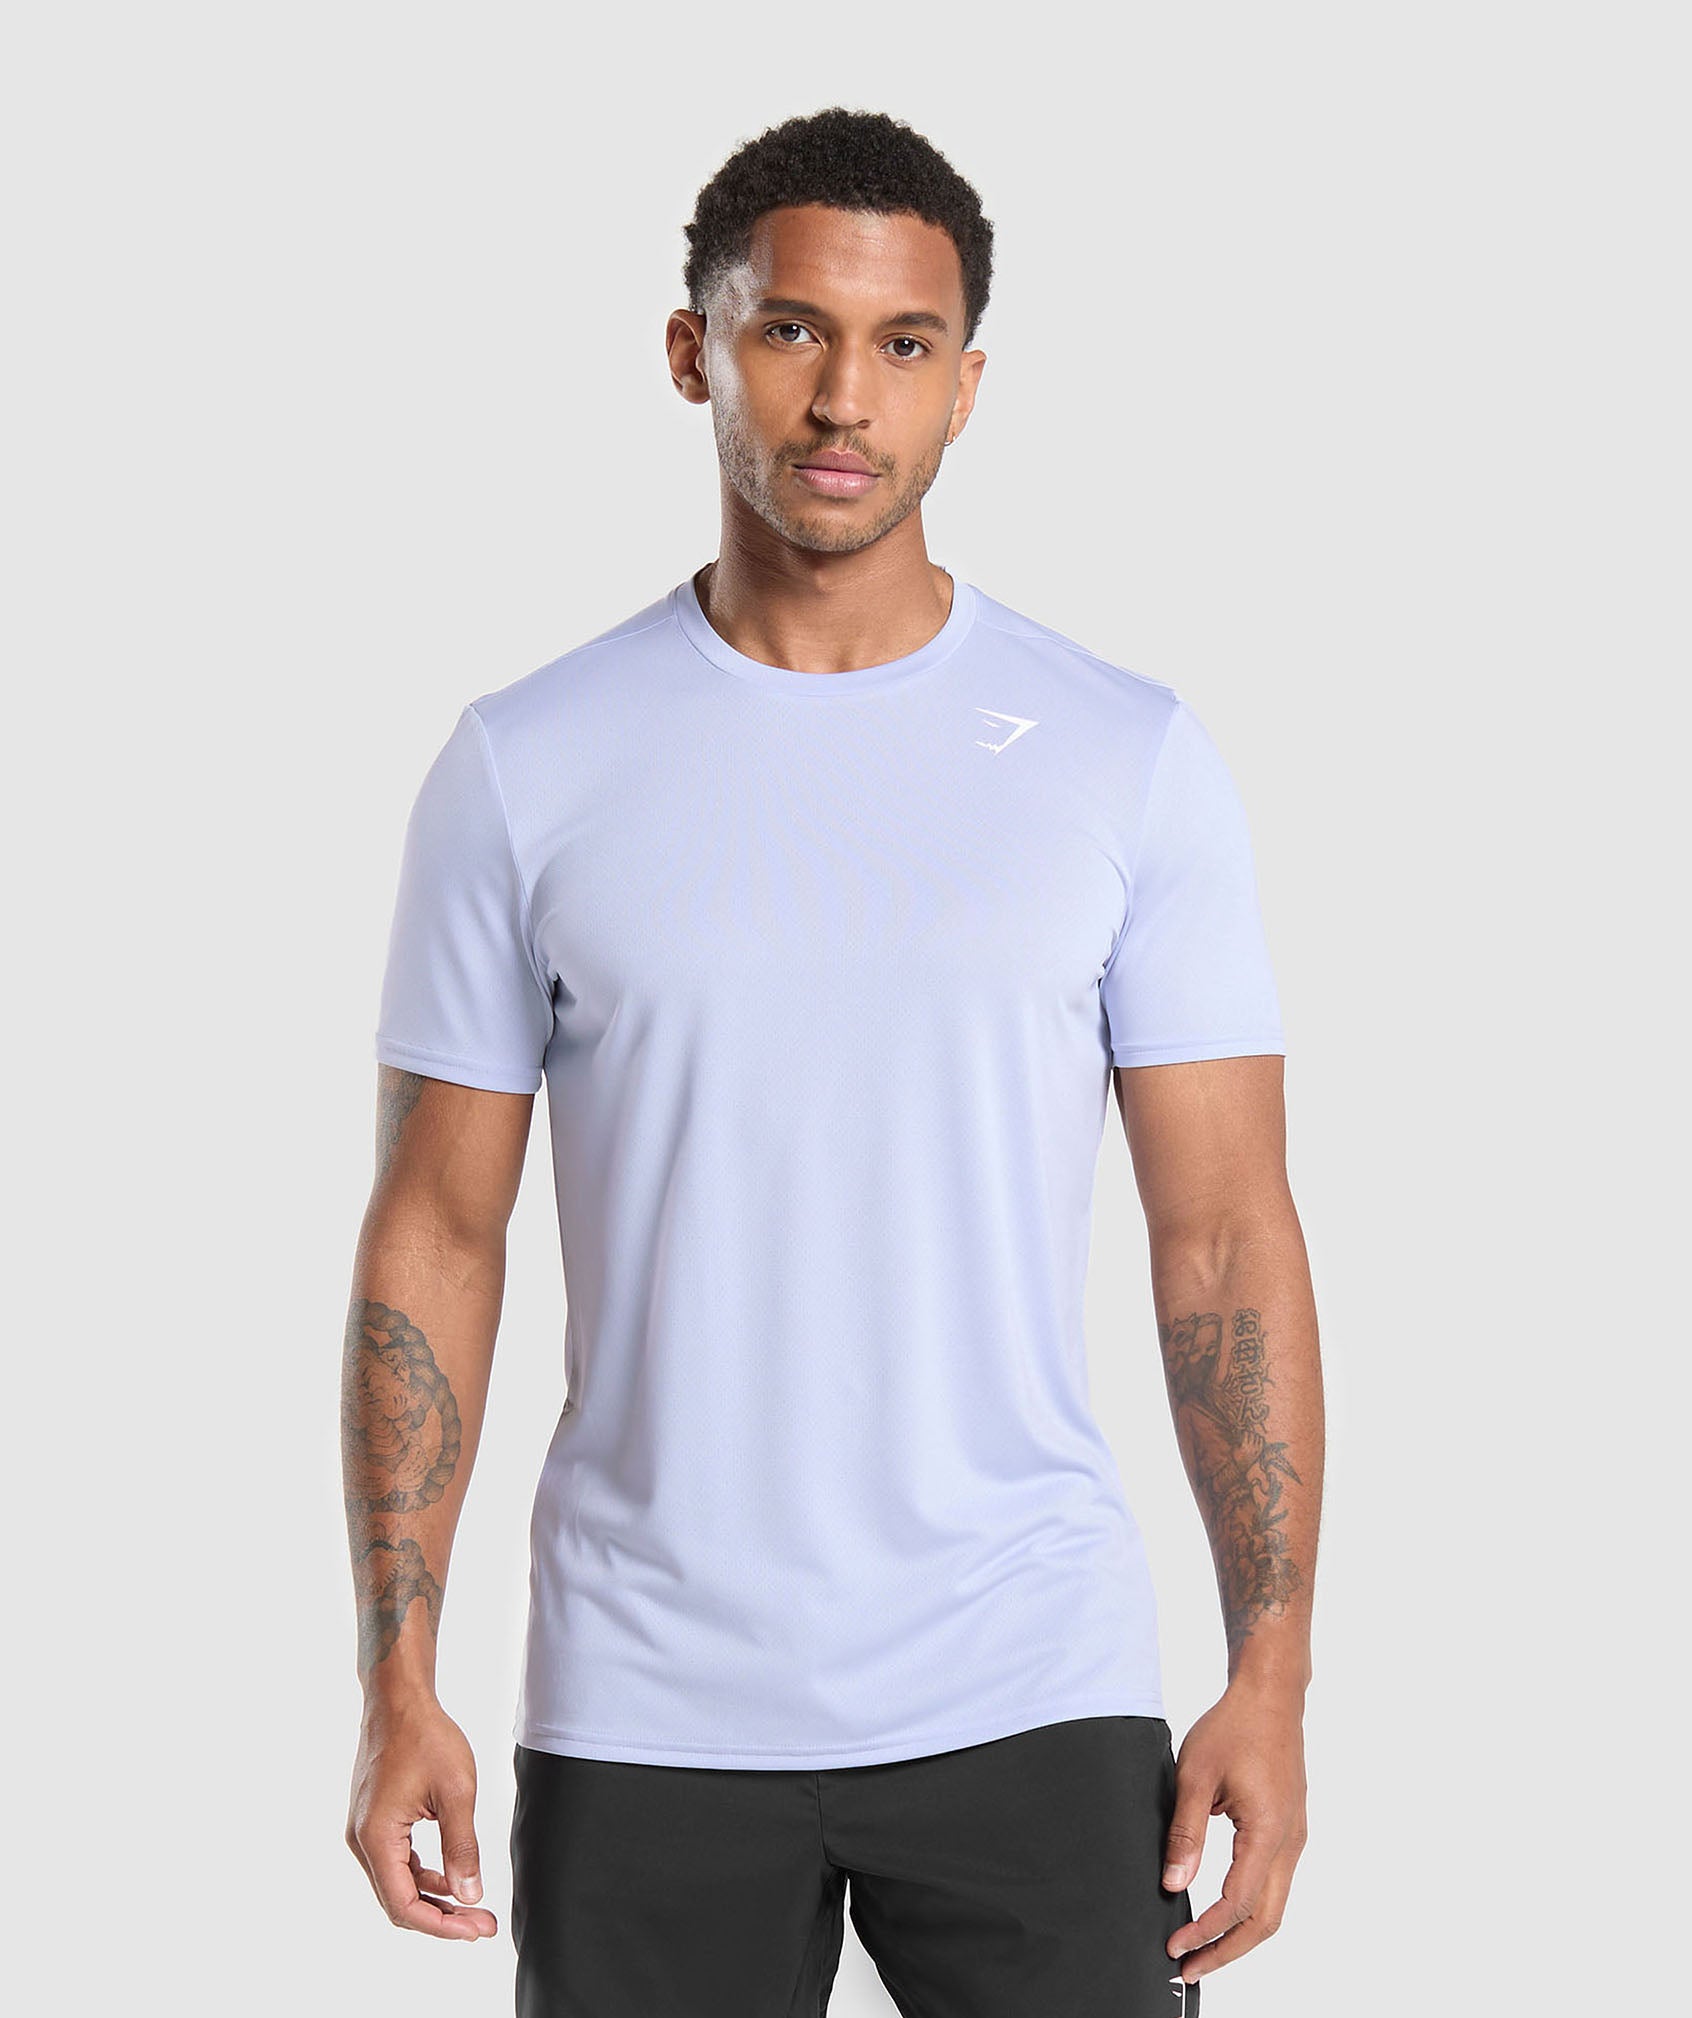 Arrival T-Shirt in Silver Lilac